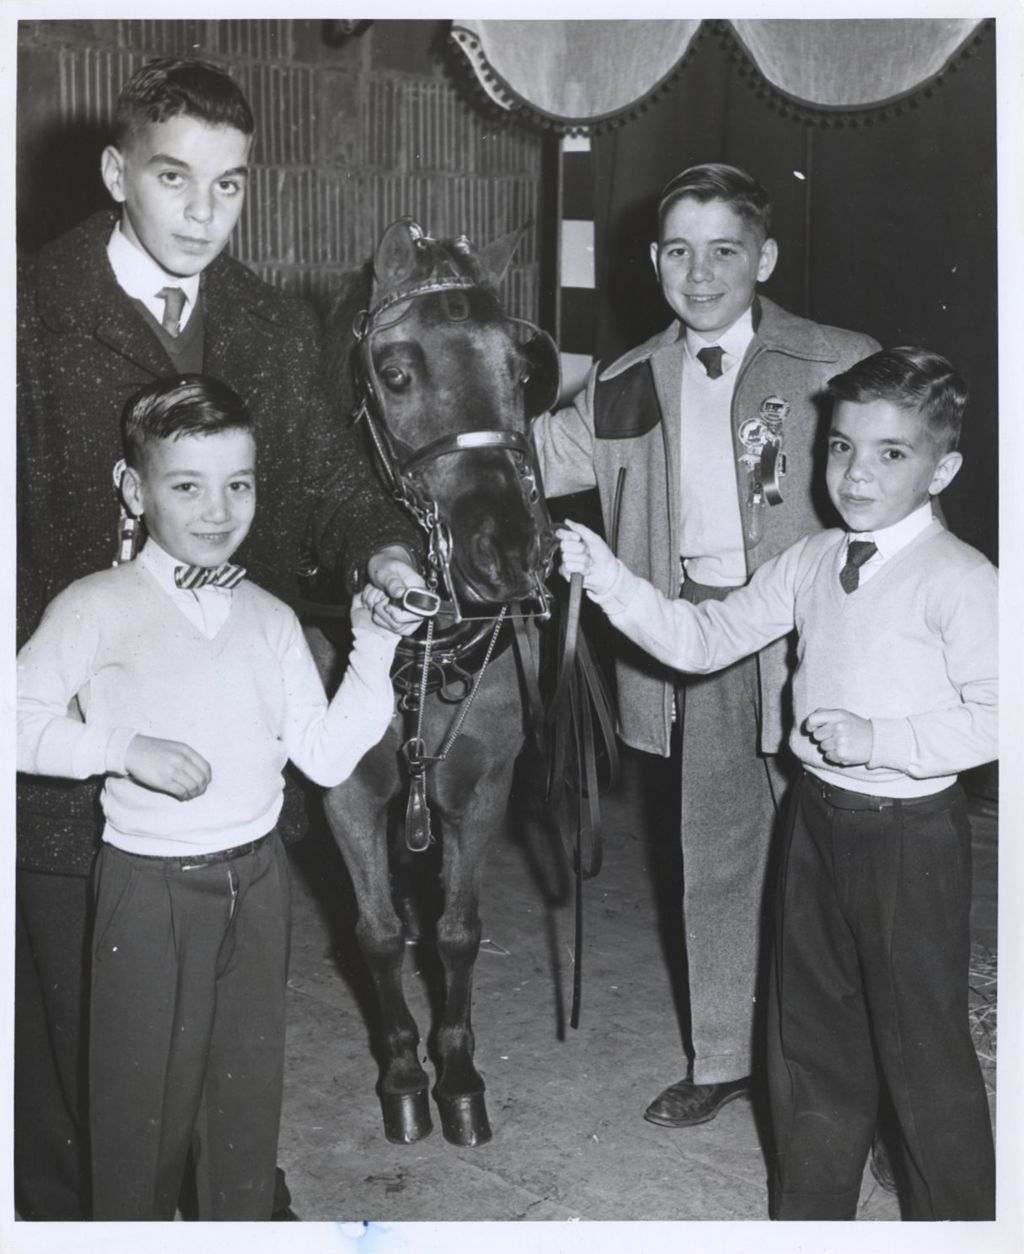 Miniature of Daley boys at International Horse Show